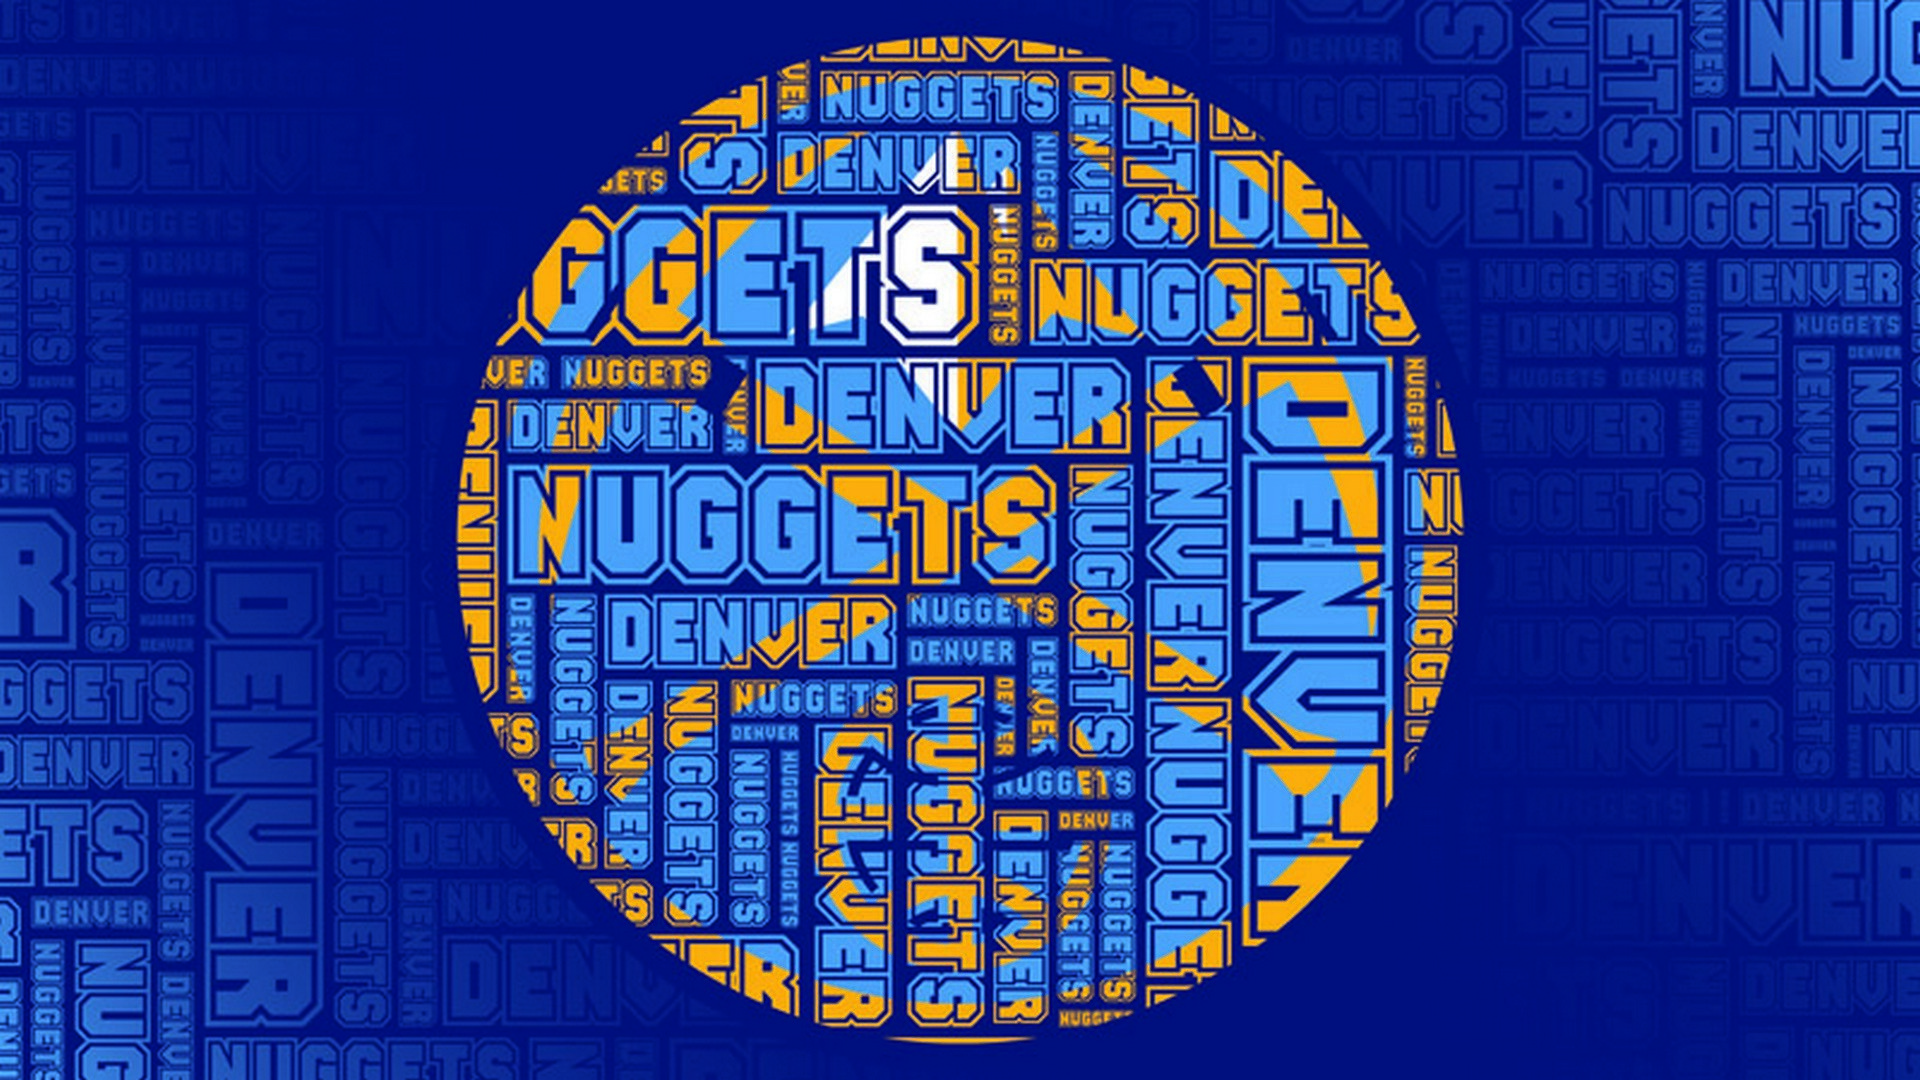 Denver Nuggets Desktop Wallpapers with high-resolution 1920x1080 pixel. You can use this wallpaper for your Desktop Computer Backgrounds, Windows or Mac Screensavers, iPhone Lock screen, Tablet or Android and another Mobile Phone device